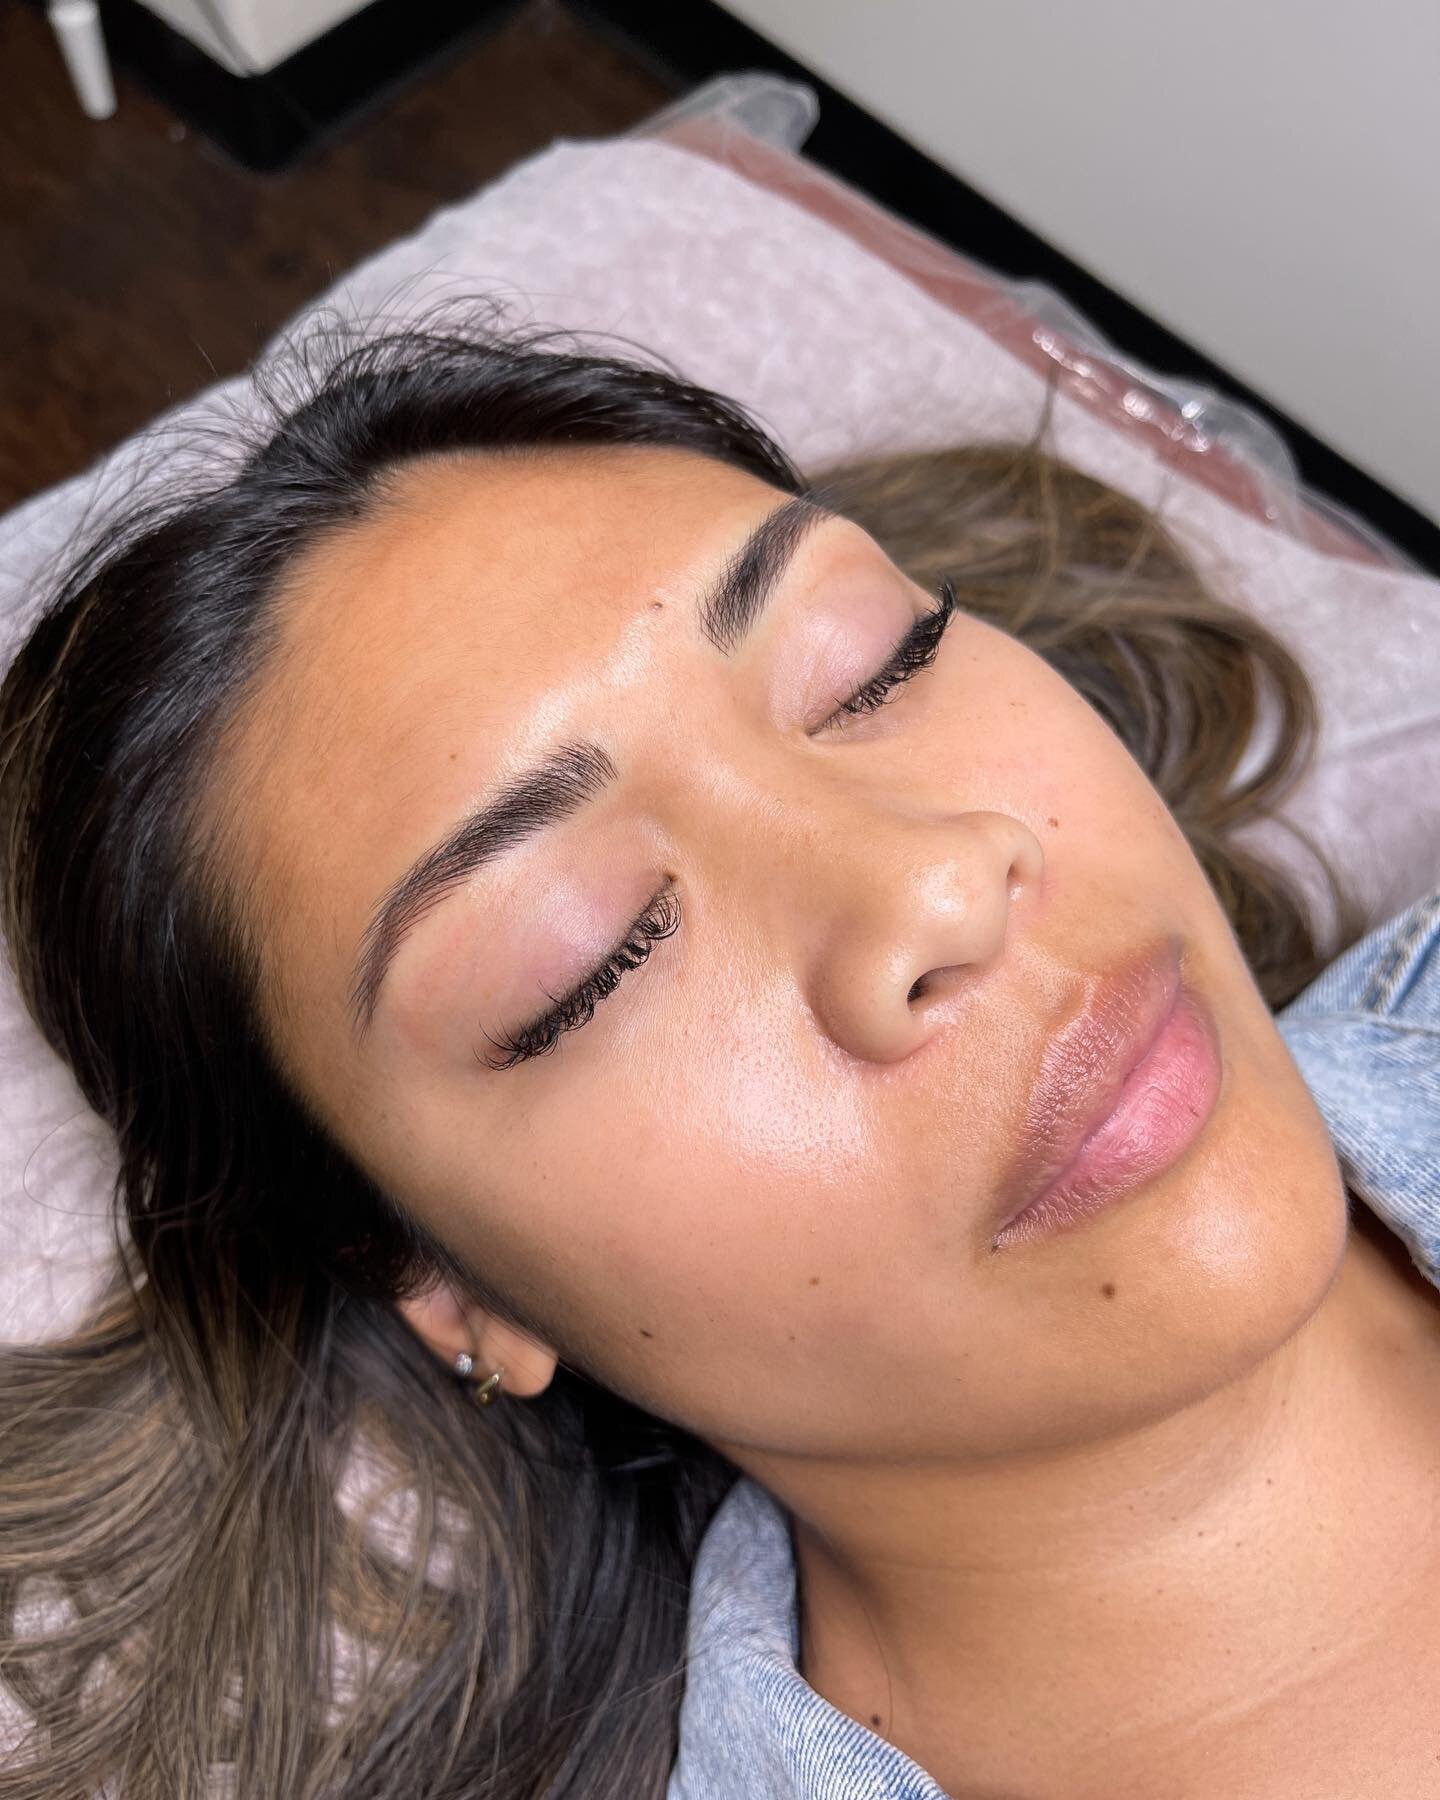 Want more fluffy and defined brows? Microblading can help you ☺️ I like to keep it as natural as possible while still elevating your brows. 

Procedure: Microblading
Procedure Time: 3-4 hours
Semi-permanent natural results

DM or Text/Call 619-798-60